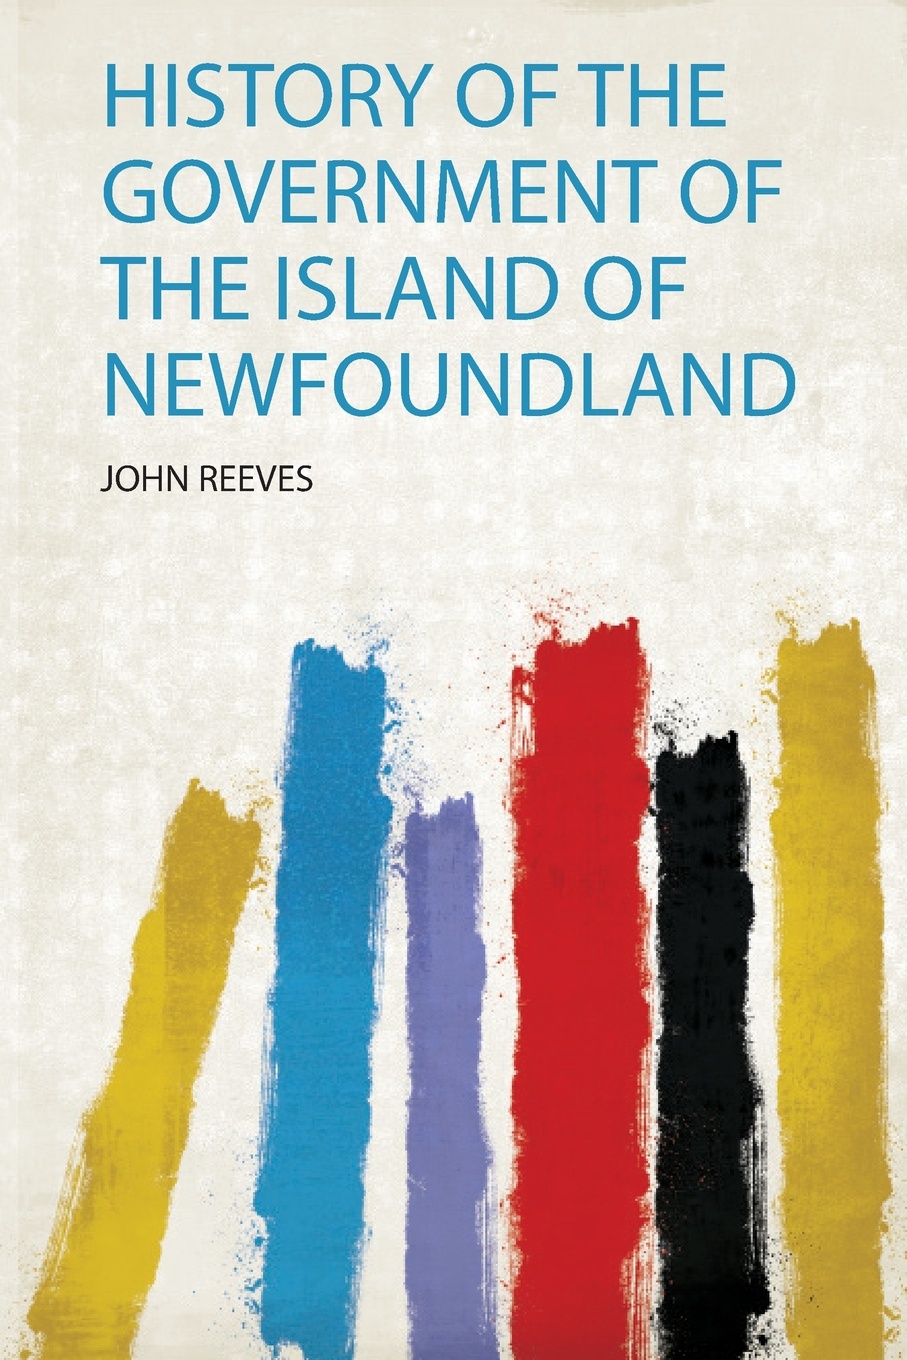 History of the Government of the Island of Newfoundland